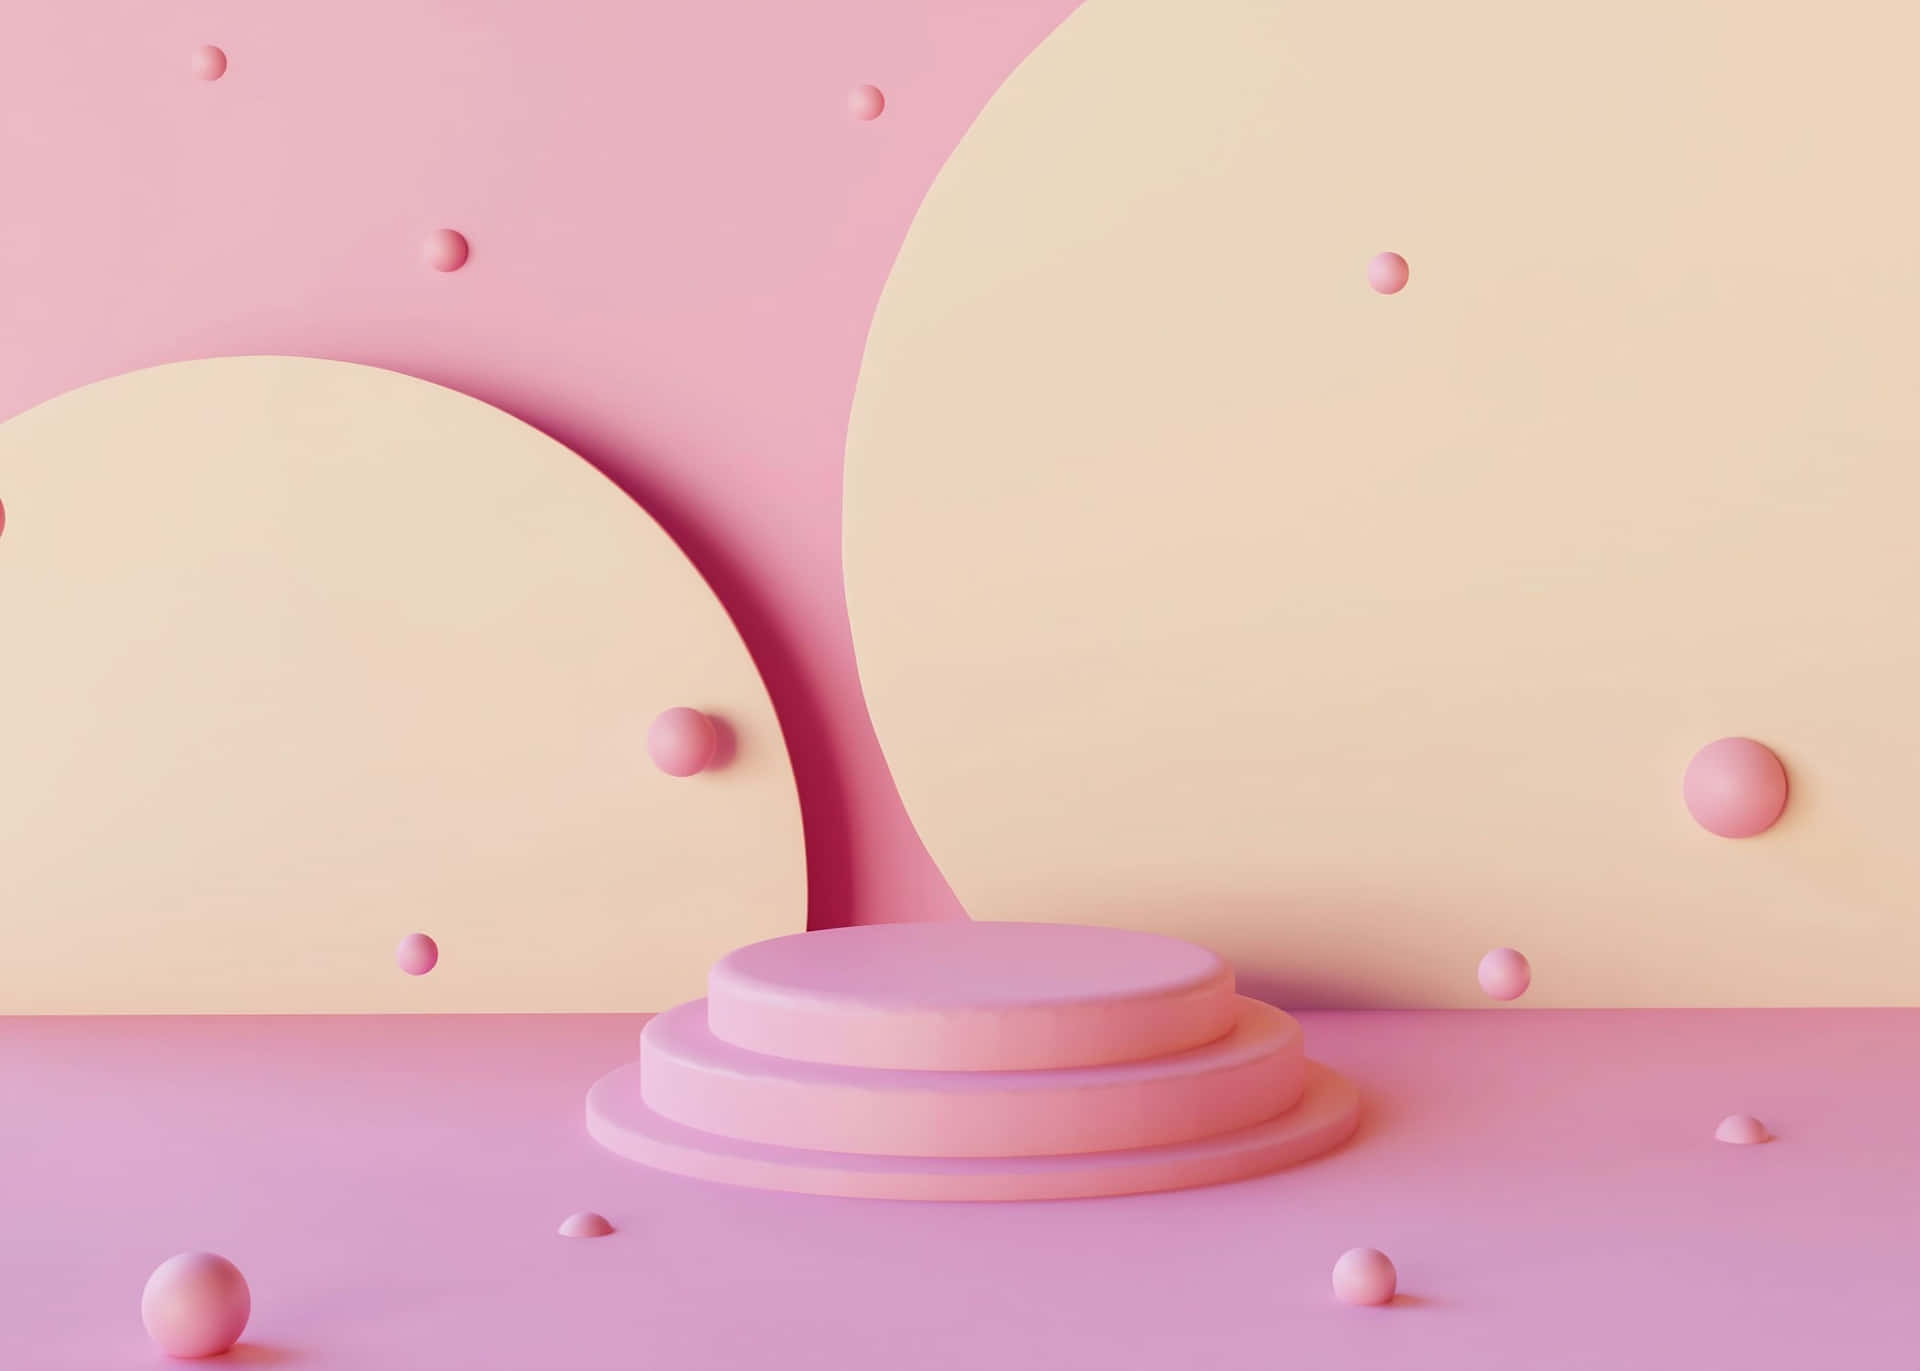 3d Rendering Of A Pink Background With Circles And Circles